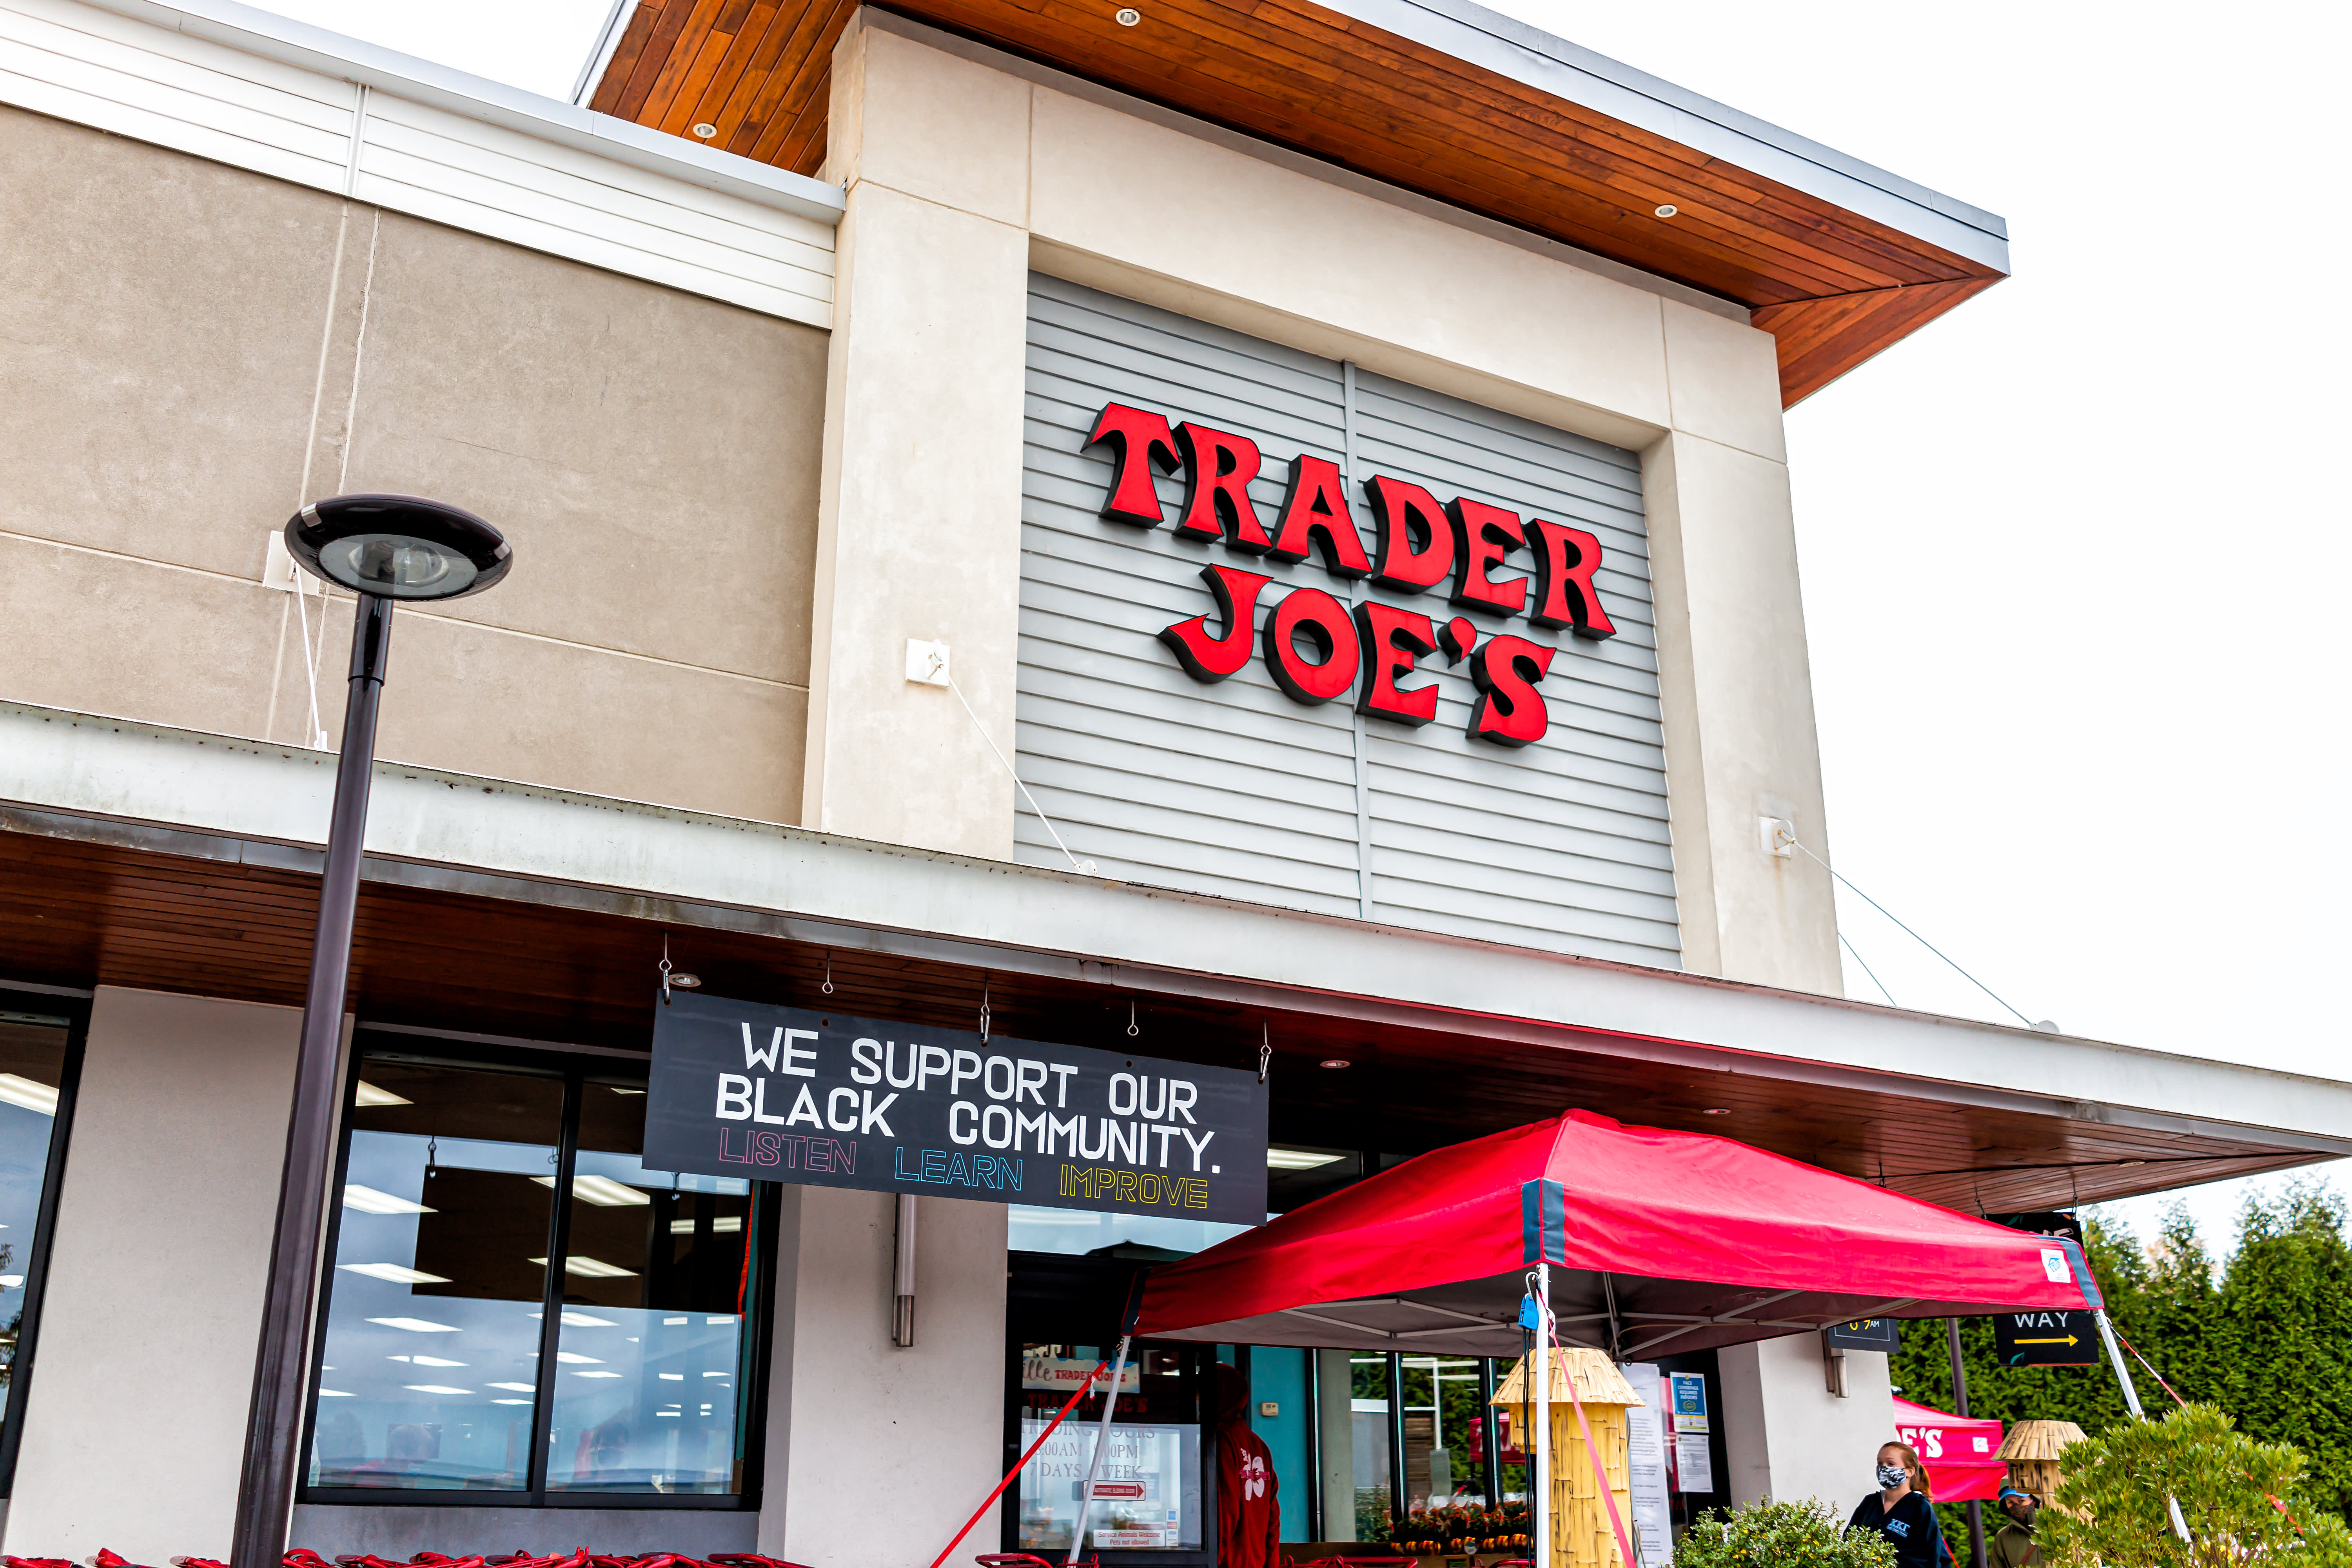 How to Get Trader Joe's Delivery? 5 Alternate Ways That Works in 2023